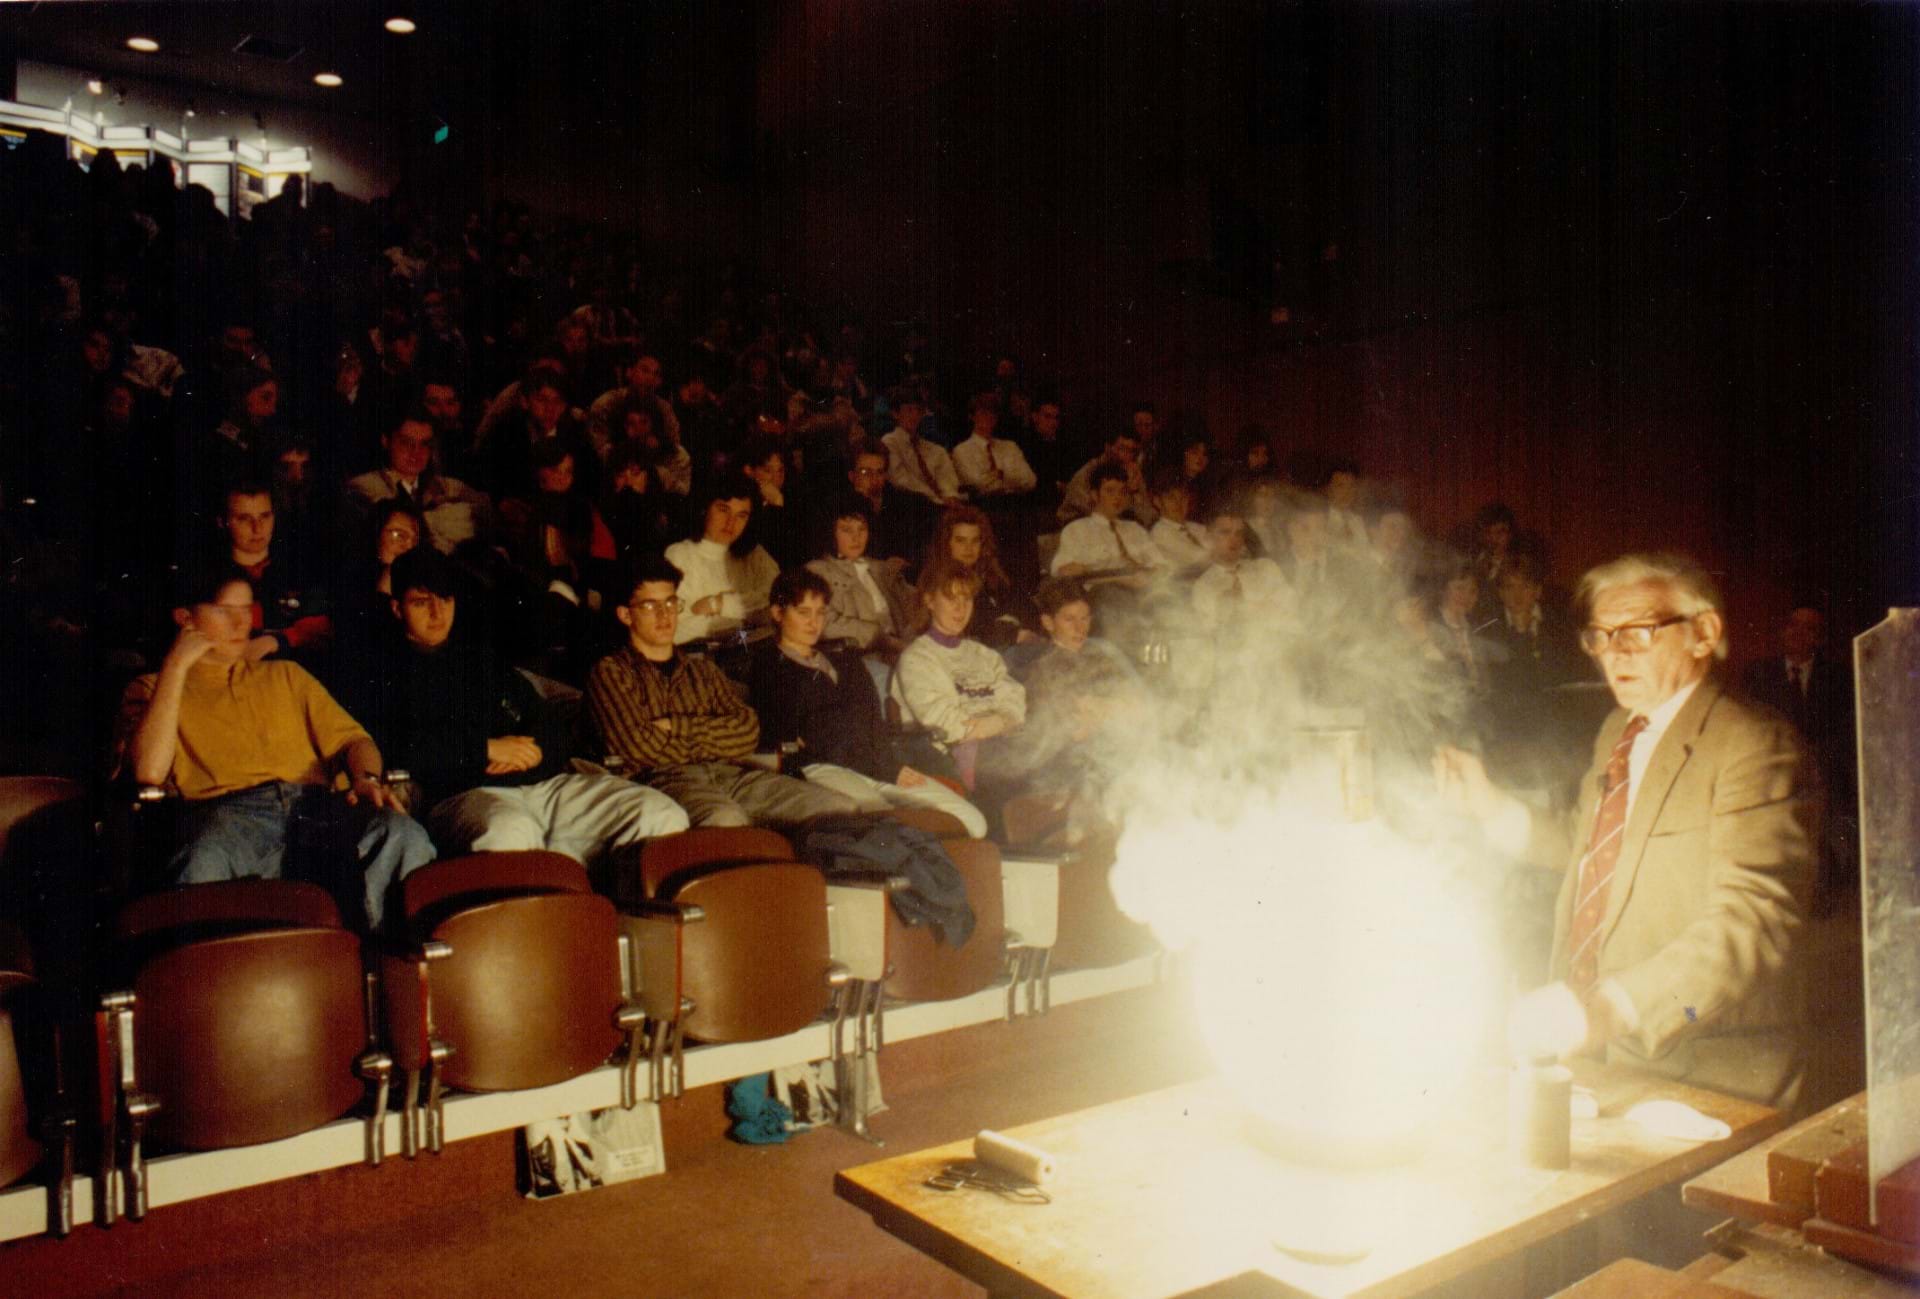 An explosive lecture at Dundee Institute of Technology c. 1990